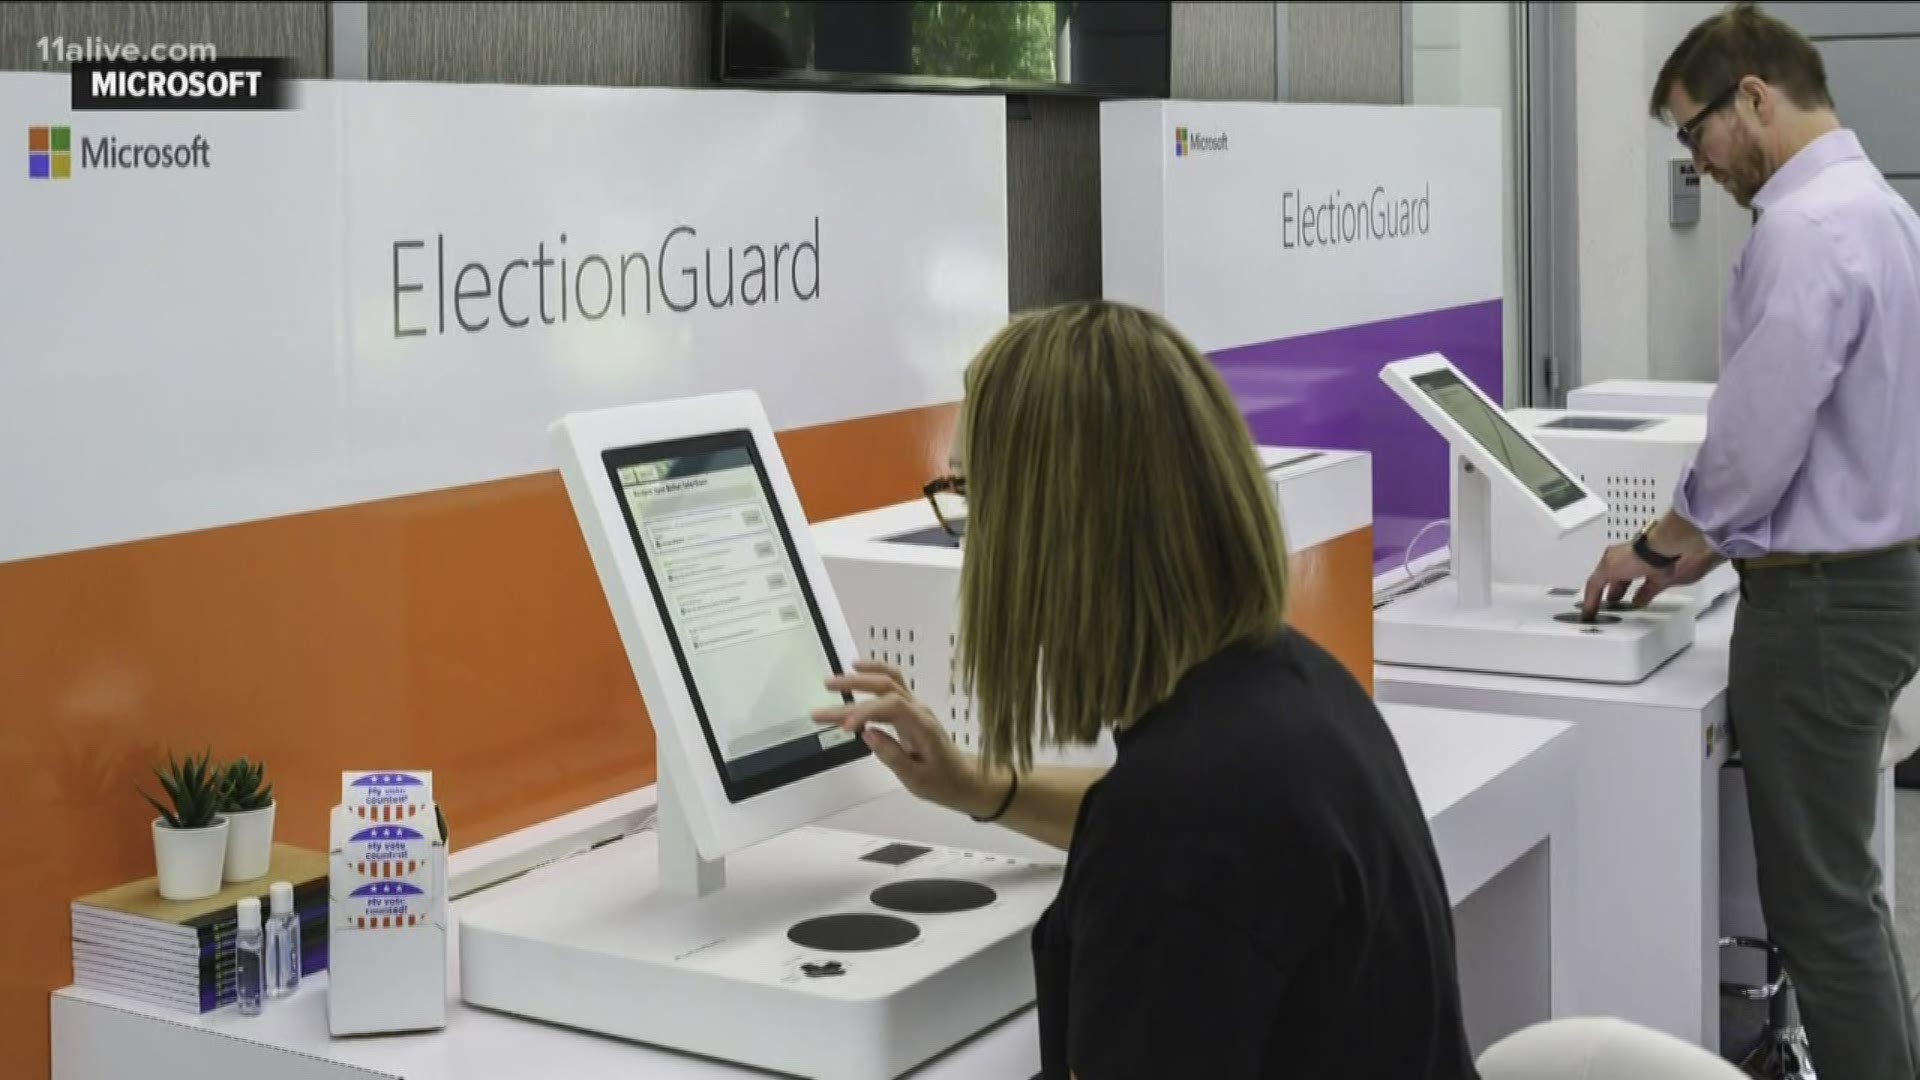 The program is called ElectionGuard